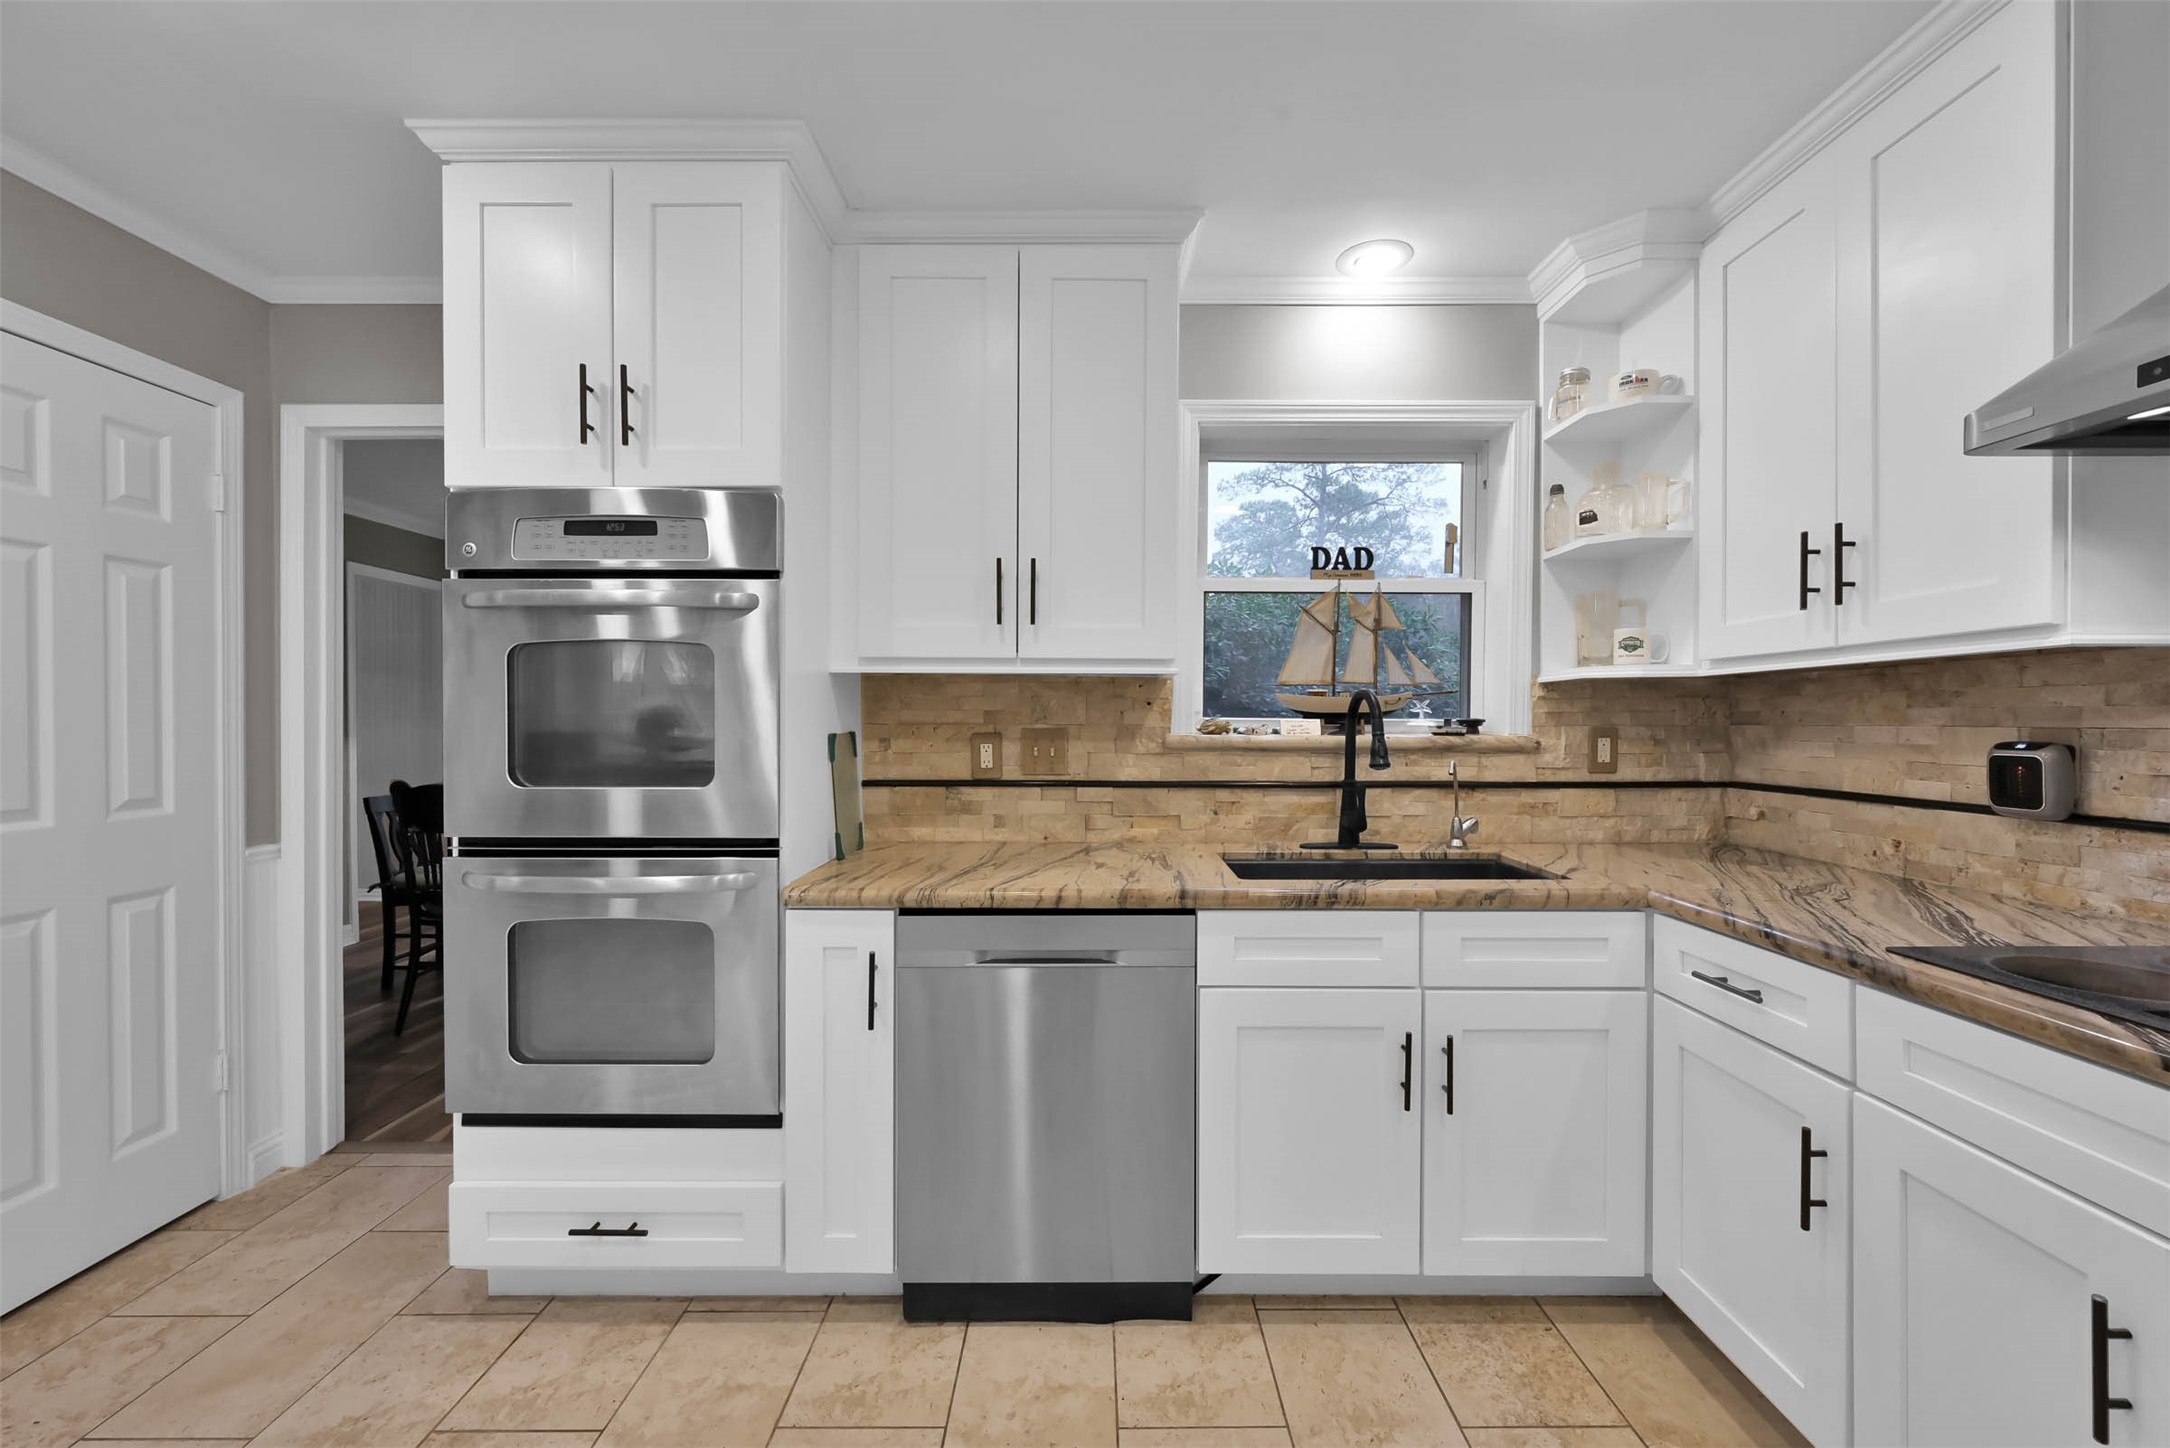 There are double ovens and a granite composite sink with a recently replaced with a handsfree faucet. The door on the left leads to a walk-in pantry.